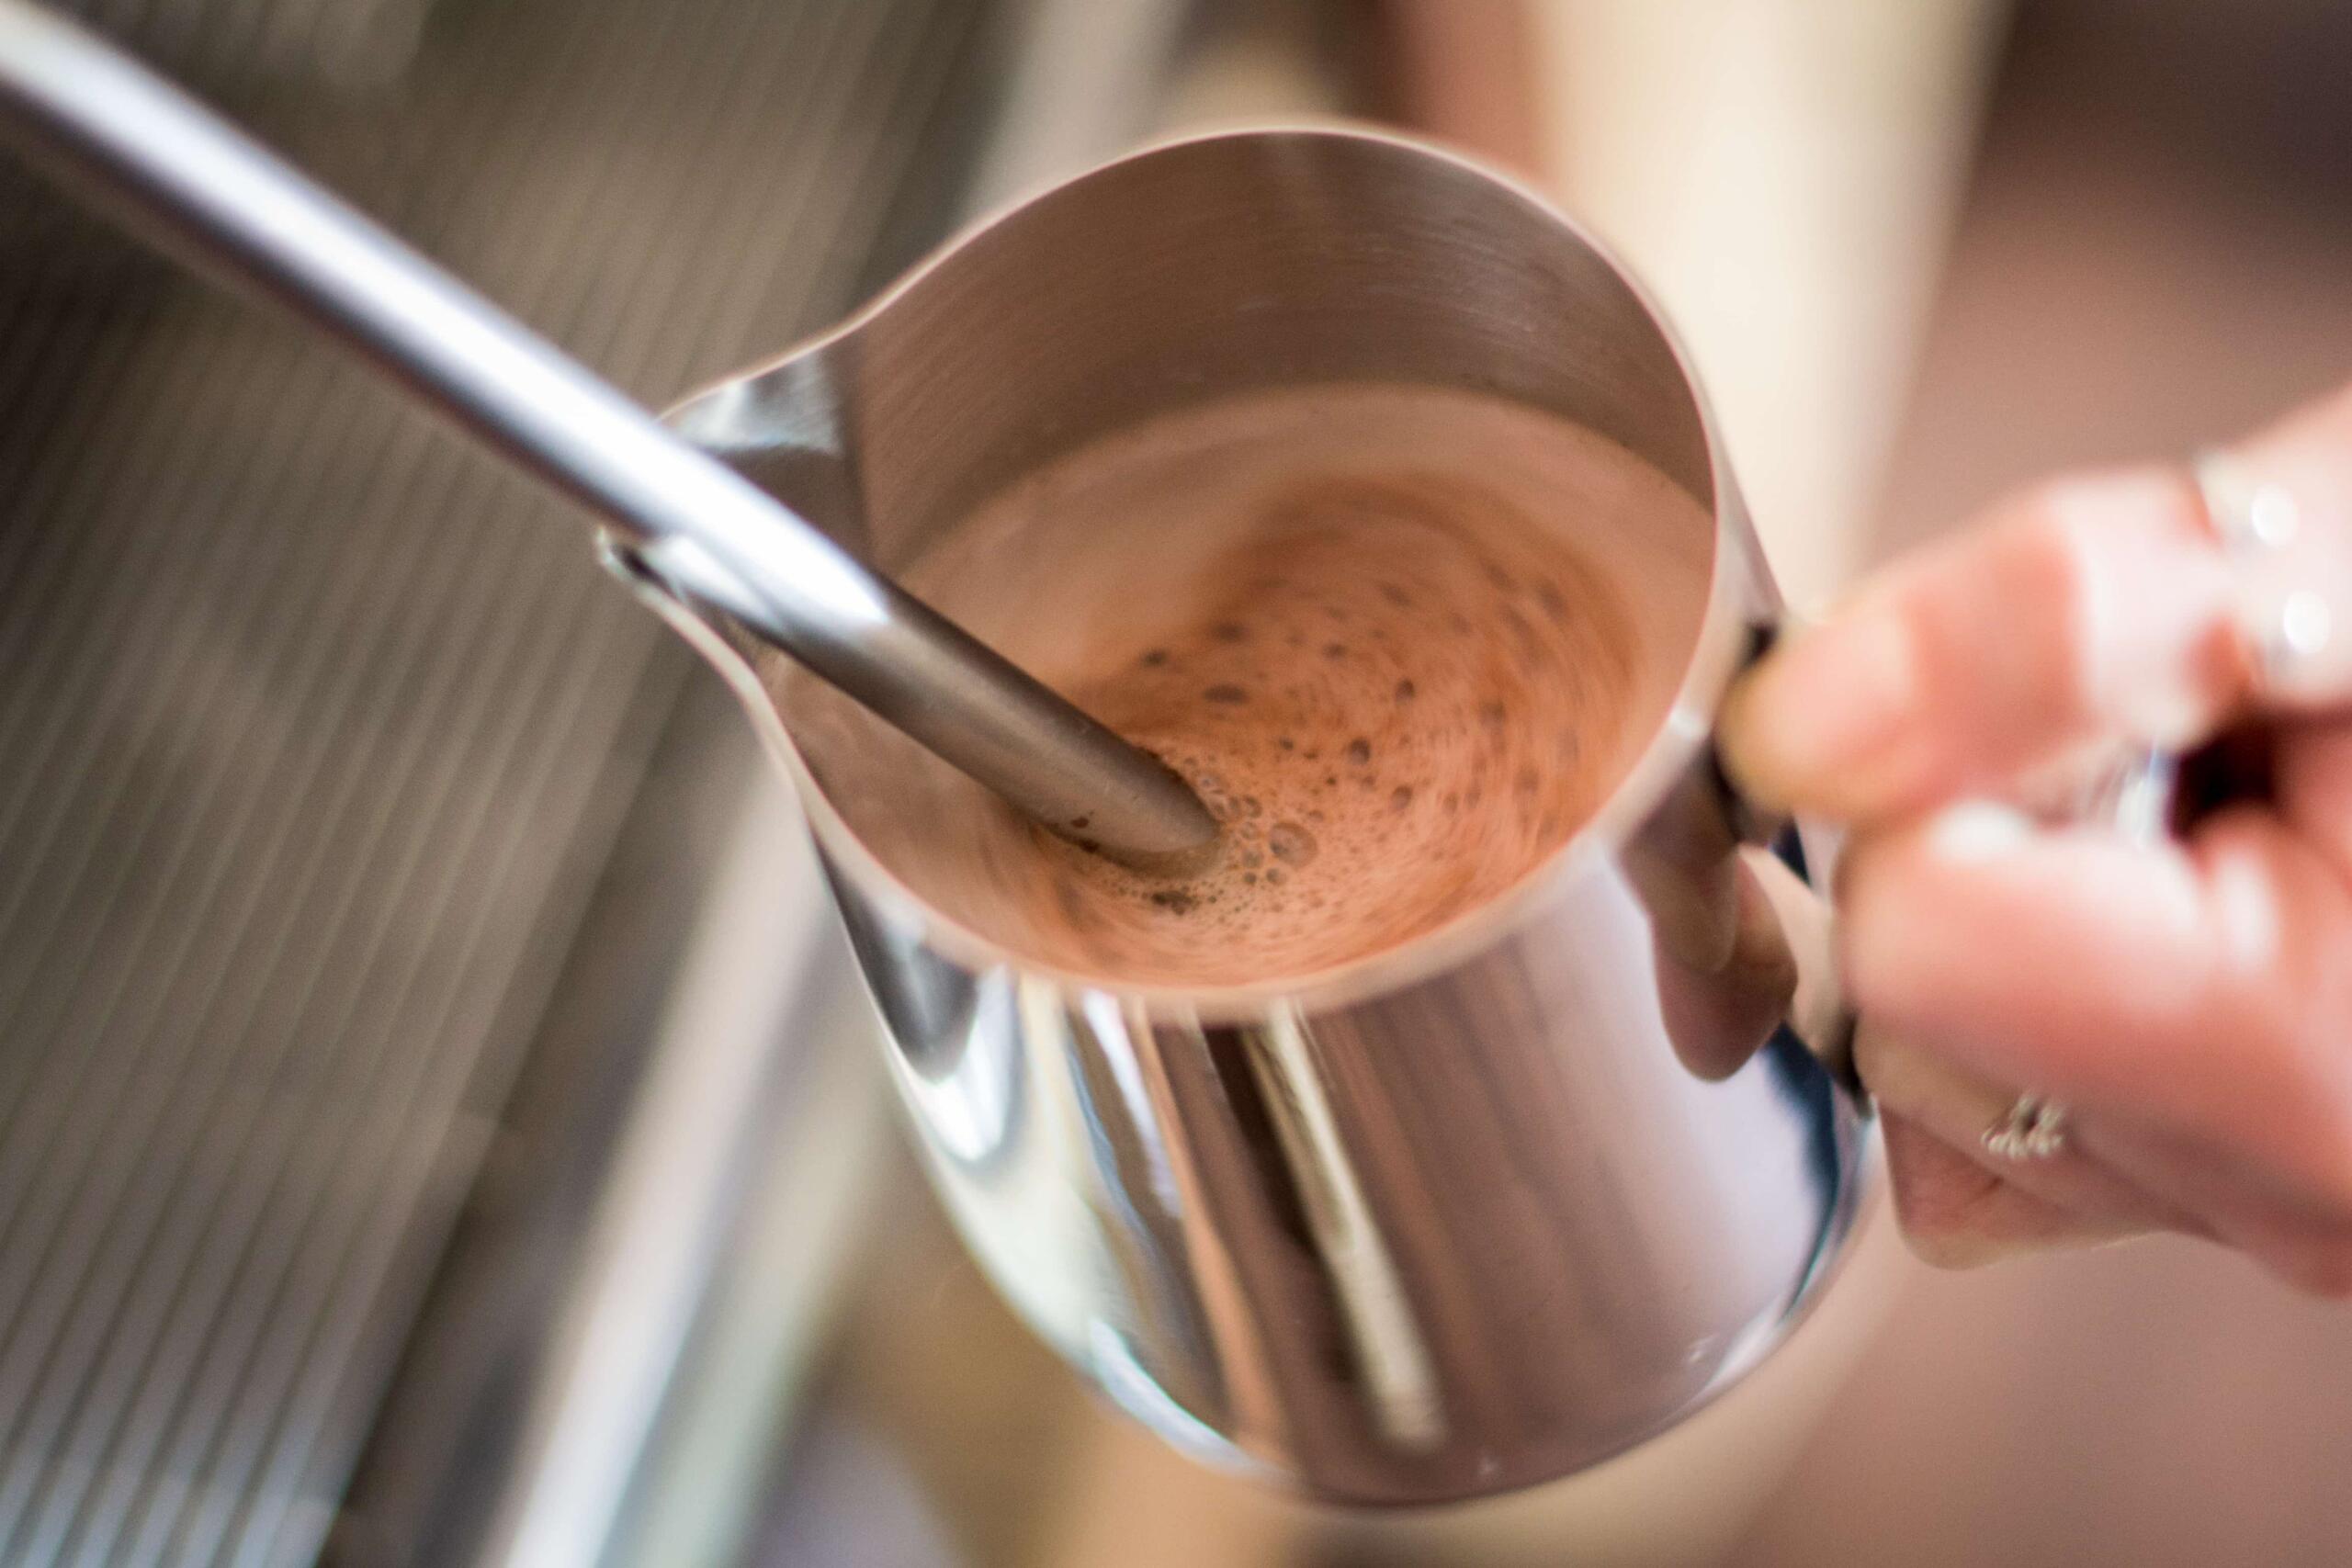 How To Make a Hot Chocolate Using an Espresso Machine - Two Chimps